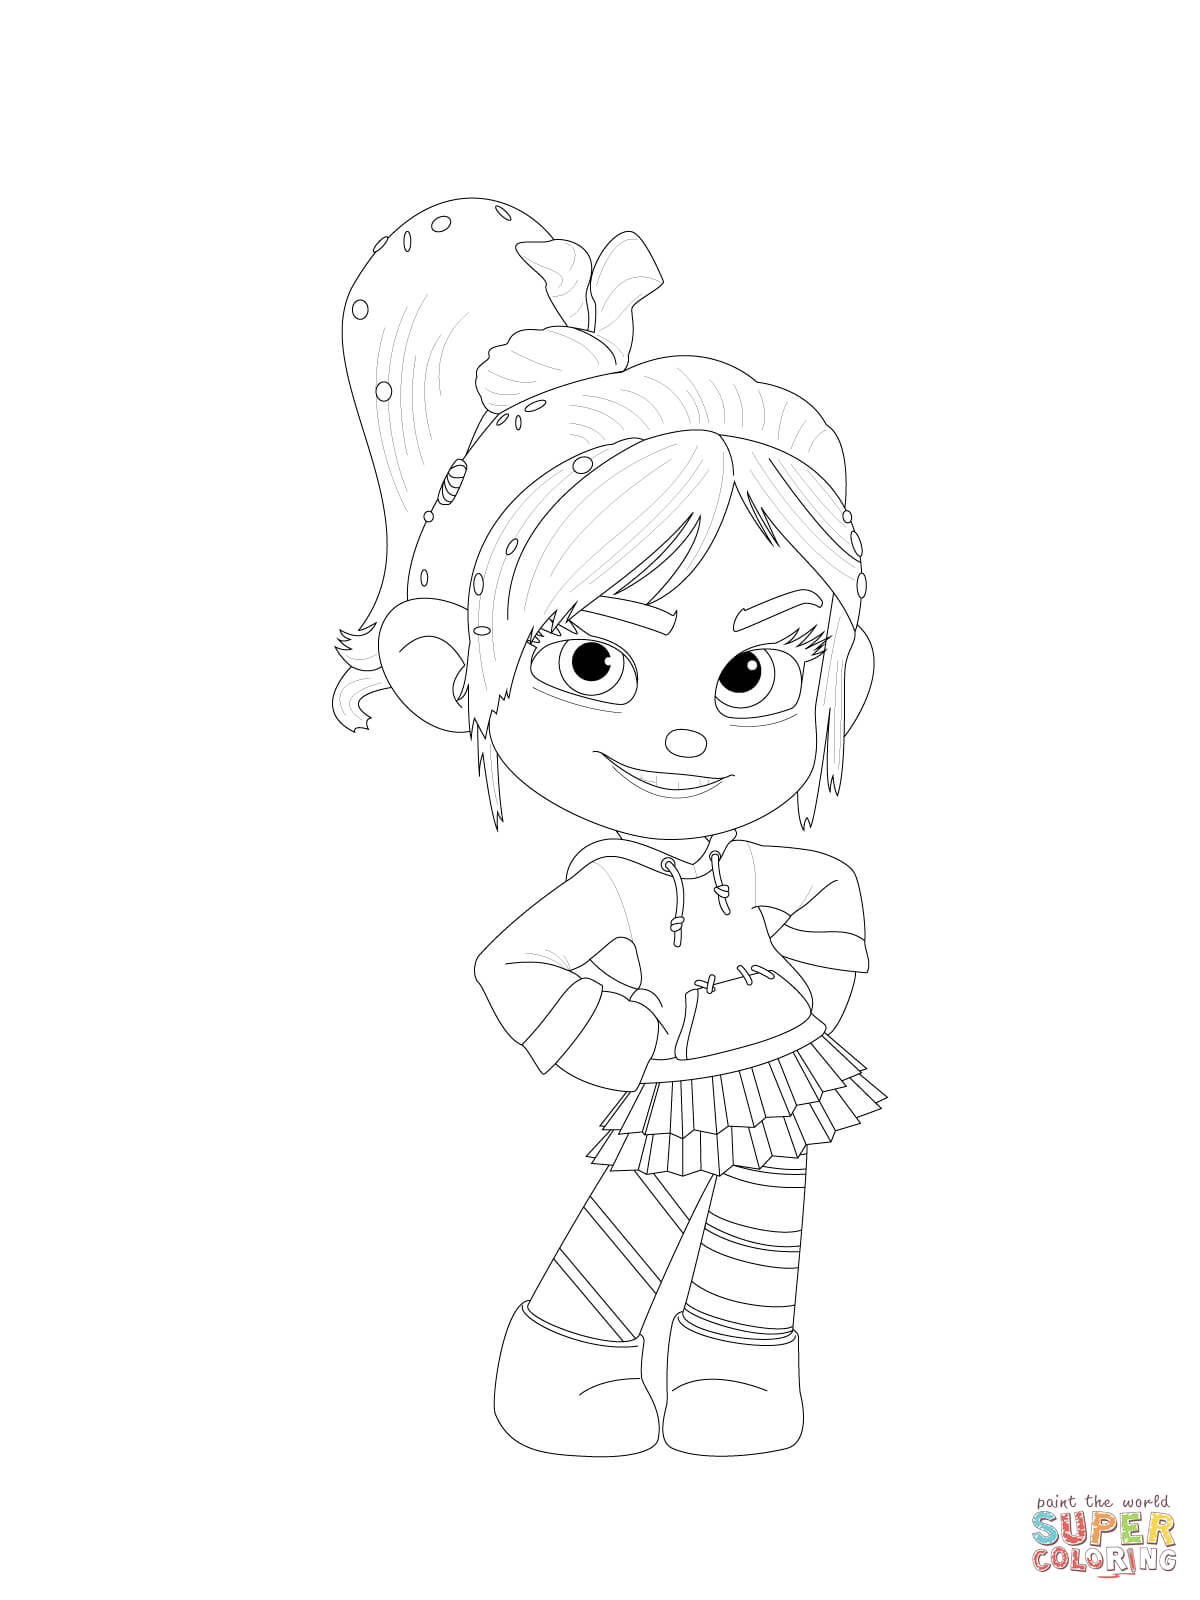 Vanellope Is Posing With Her Hands On Her Hips coloring page | Free  Printable Coloring Pages